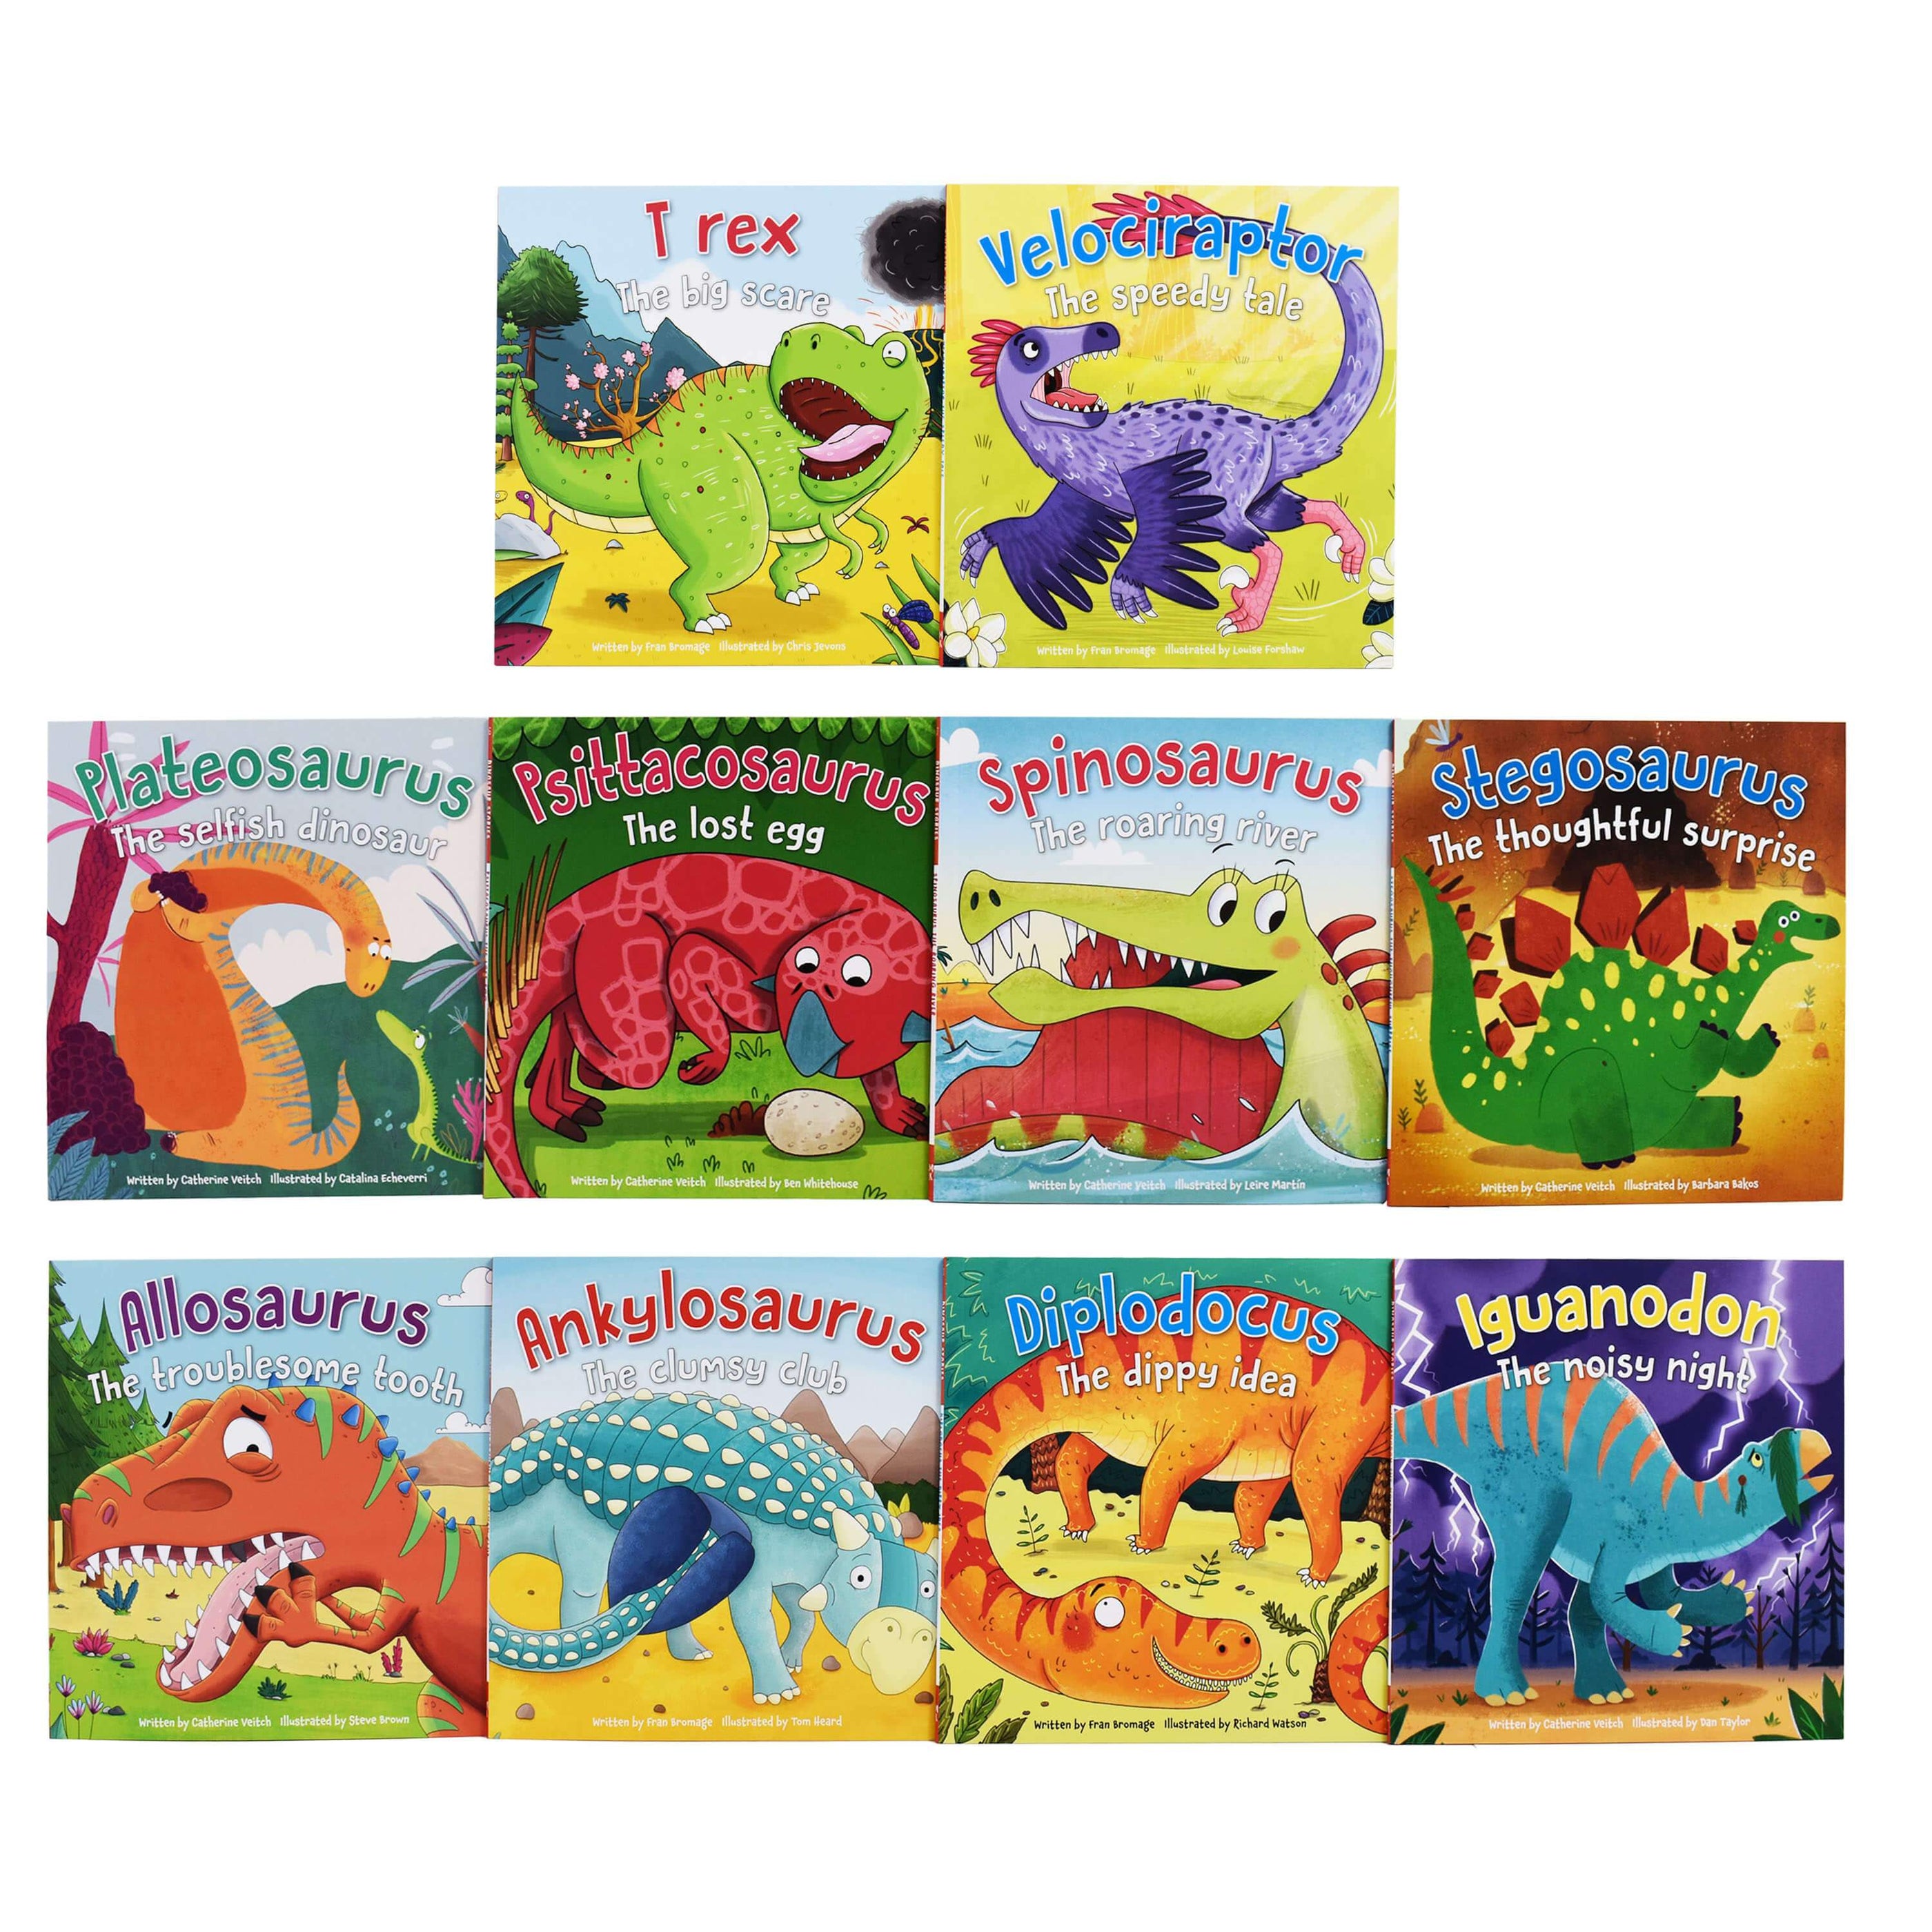 dinosaur-adventure-stories-10-books-collection-box-set-by-miles-kelly